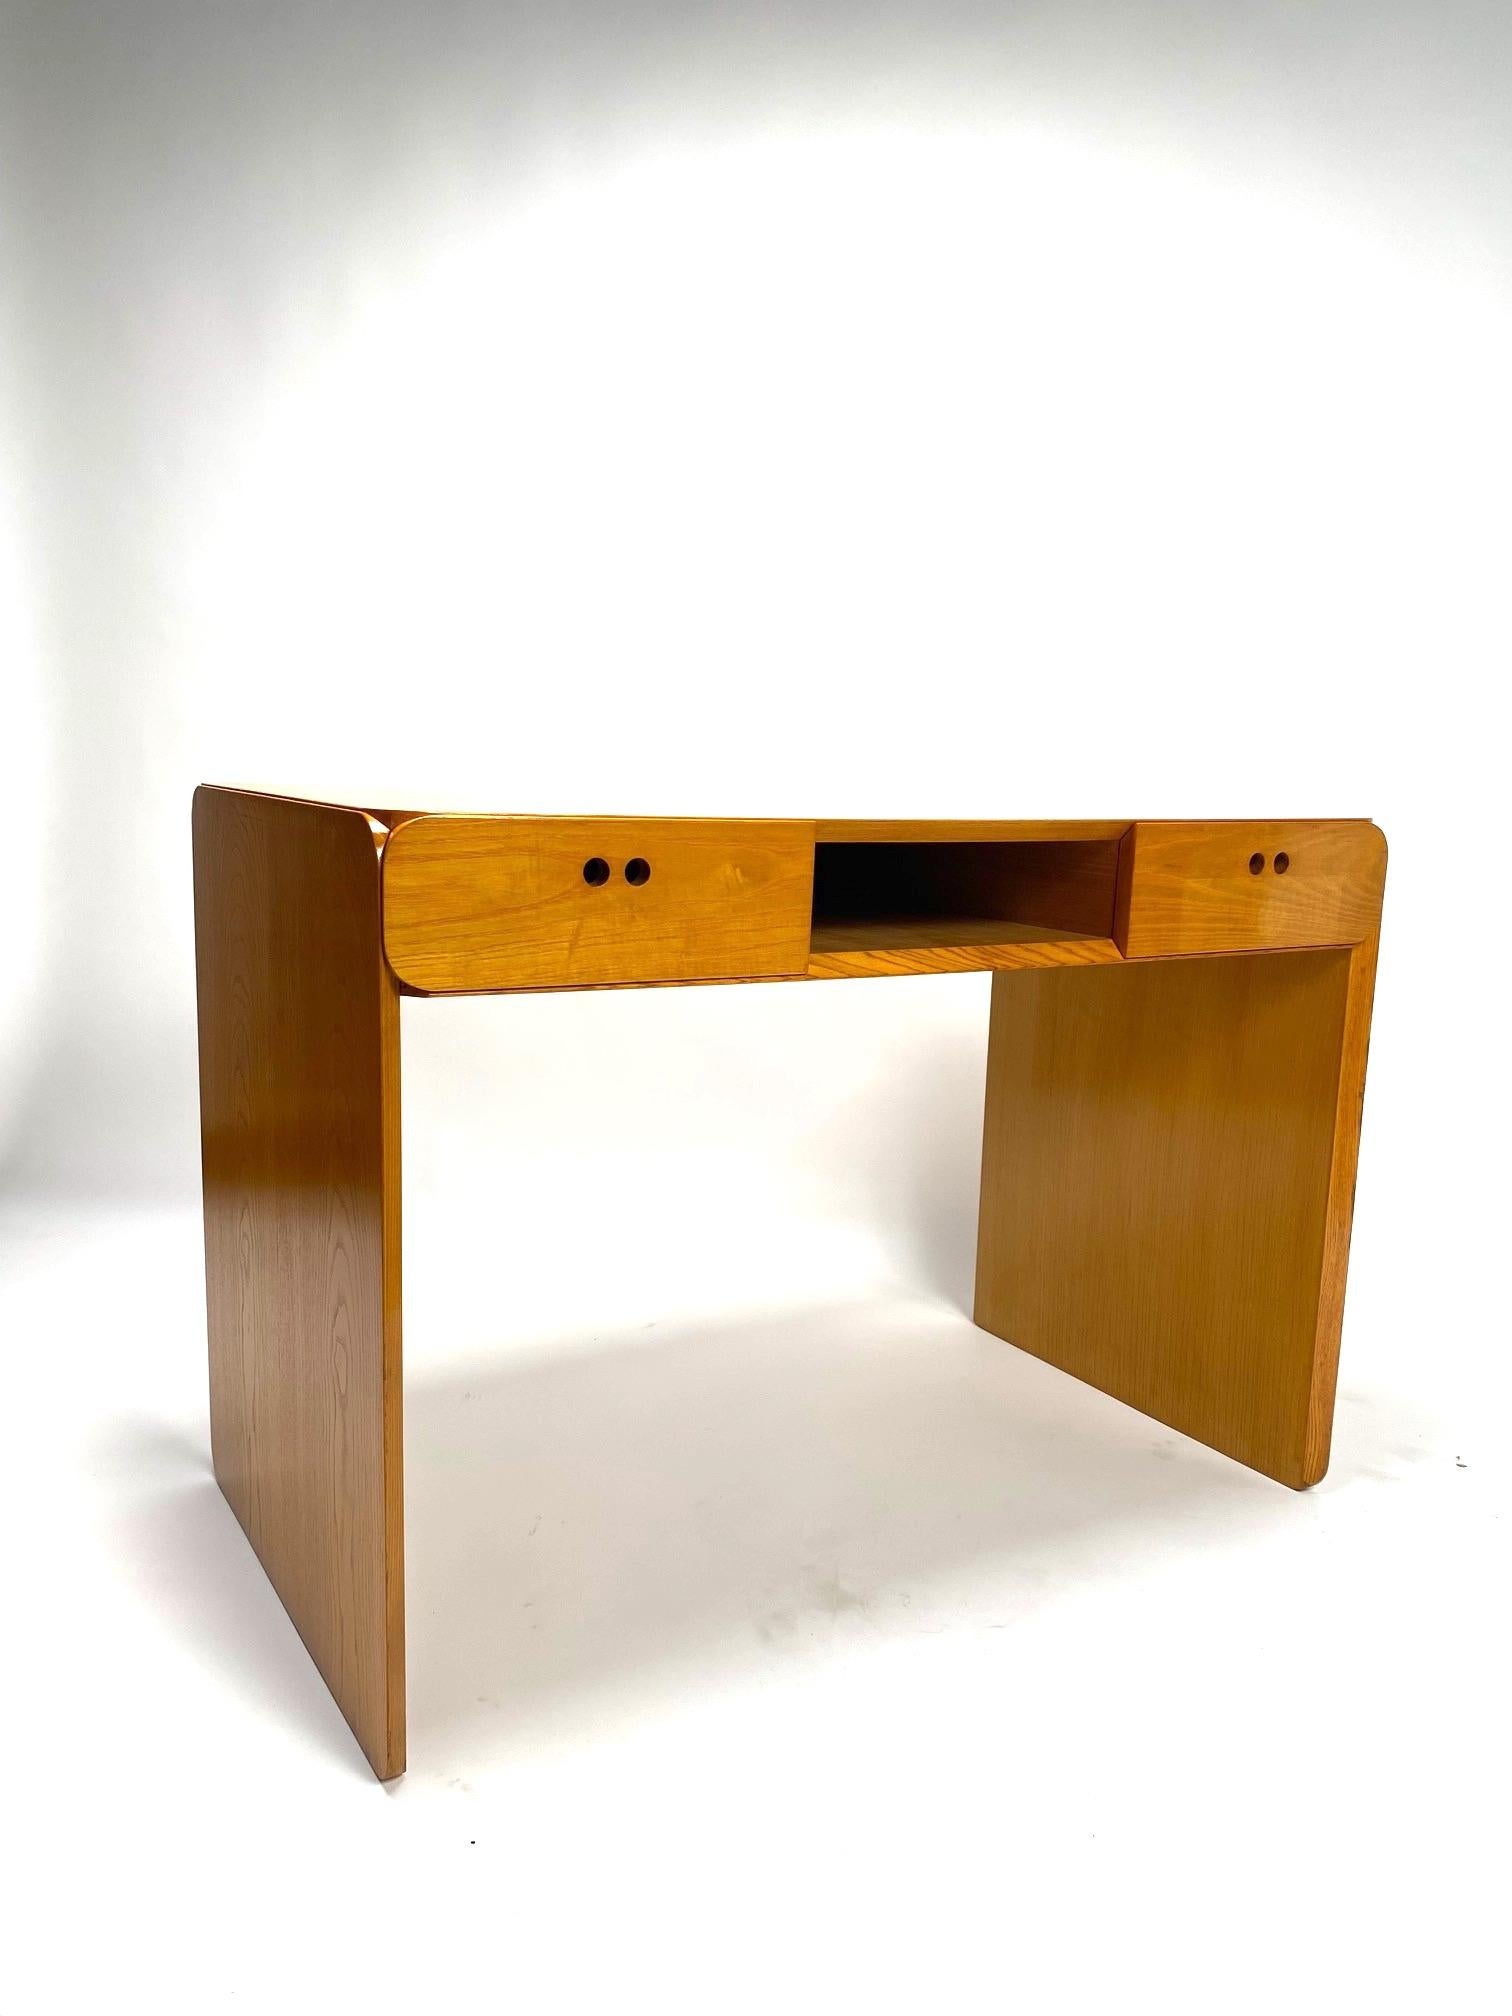 Mid-century light wood desk by Derk Jan de Vries - Netherlands, 1960s.

It is an iconic and very functional desk, thanks to its compact size it can easily be positioned in different contexts. 
A sober but refined design, capable of discreetly